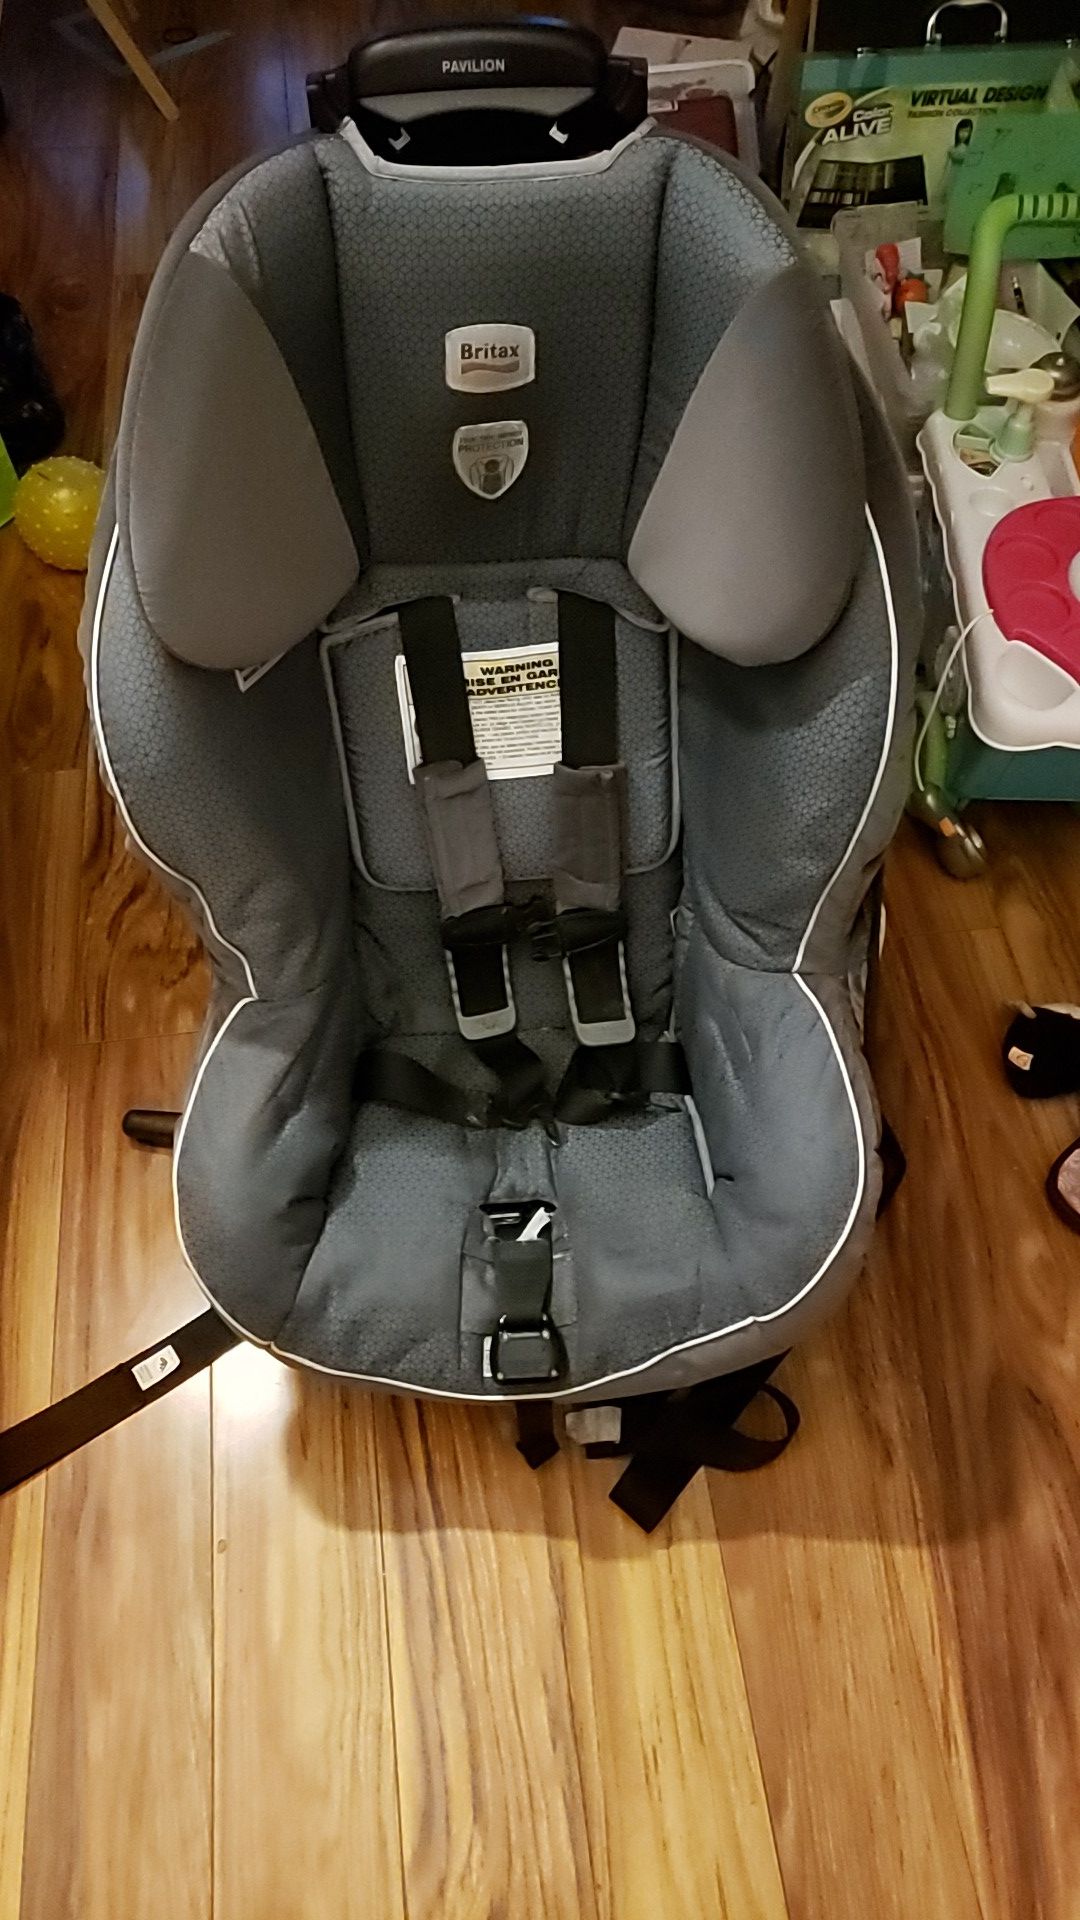 Britax Car Seat. My 6 year old just out grew.